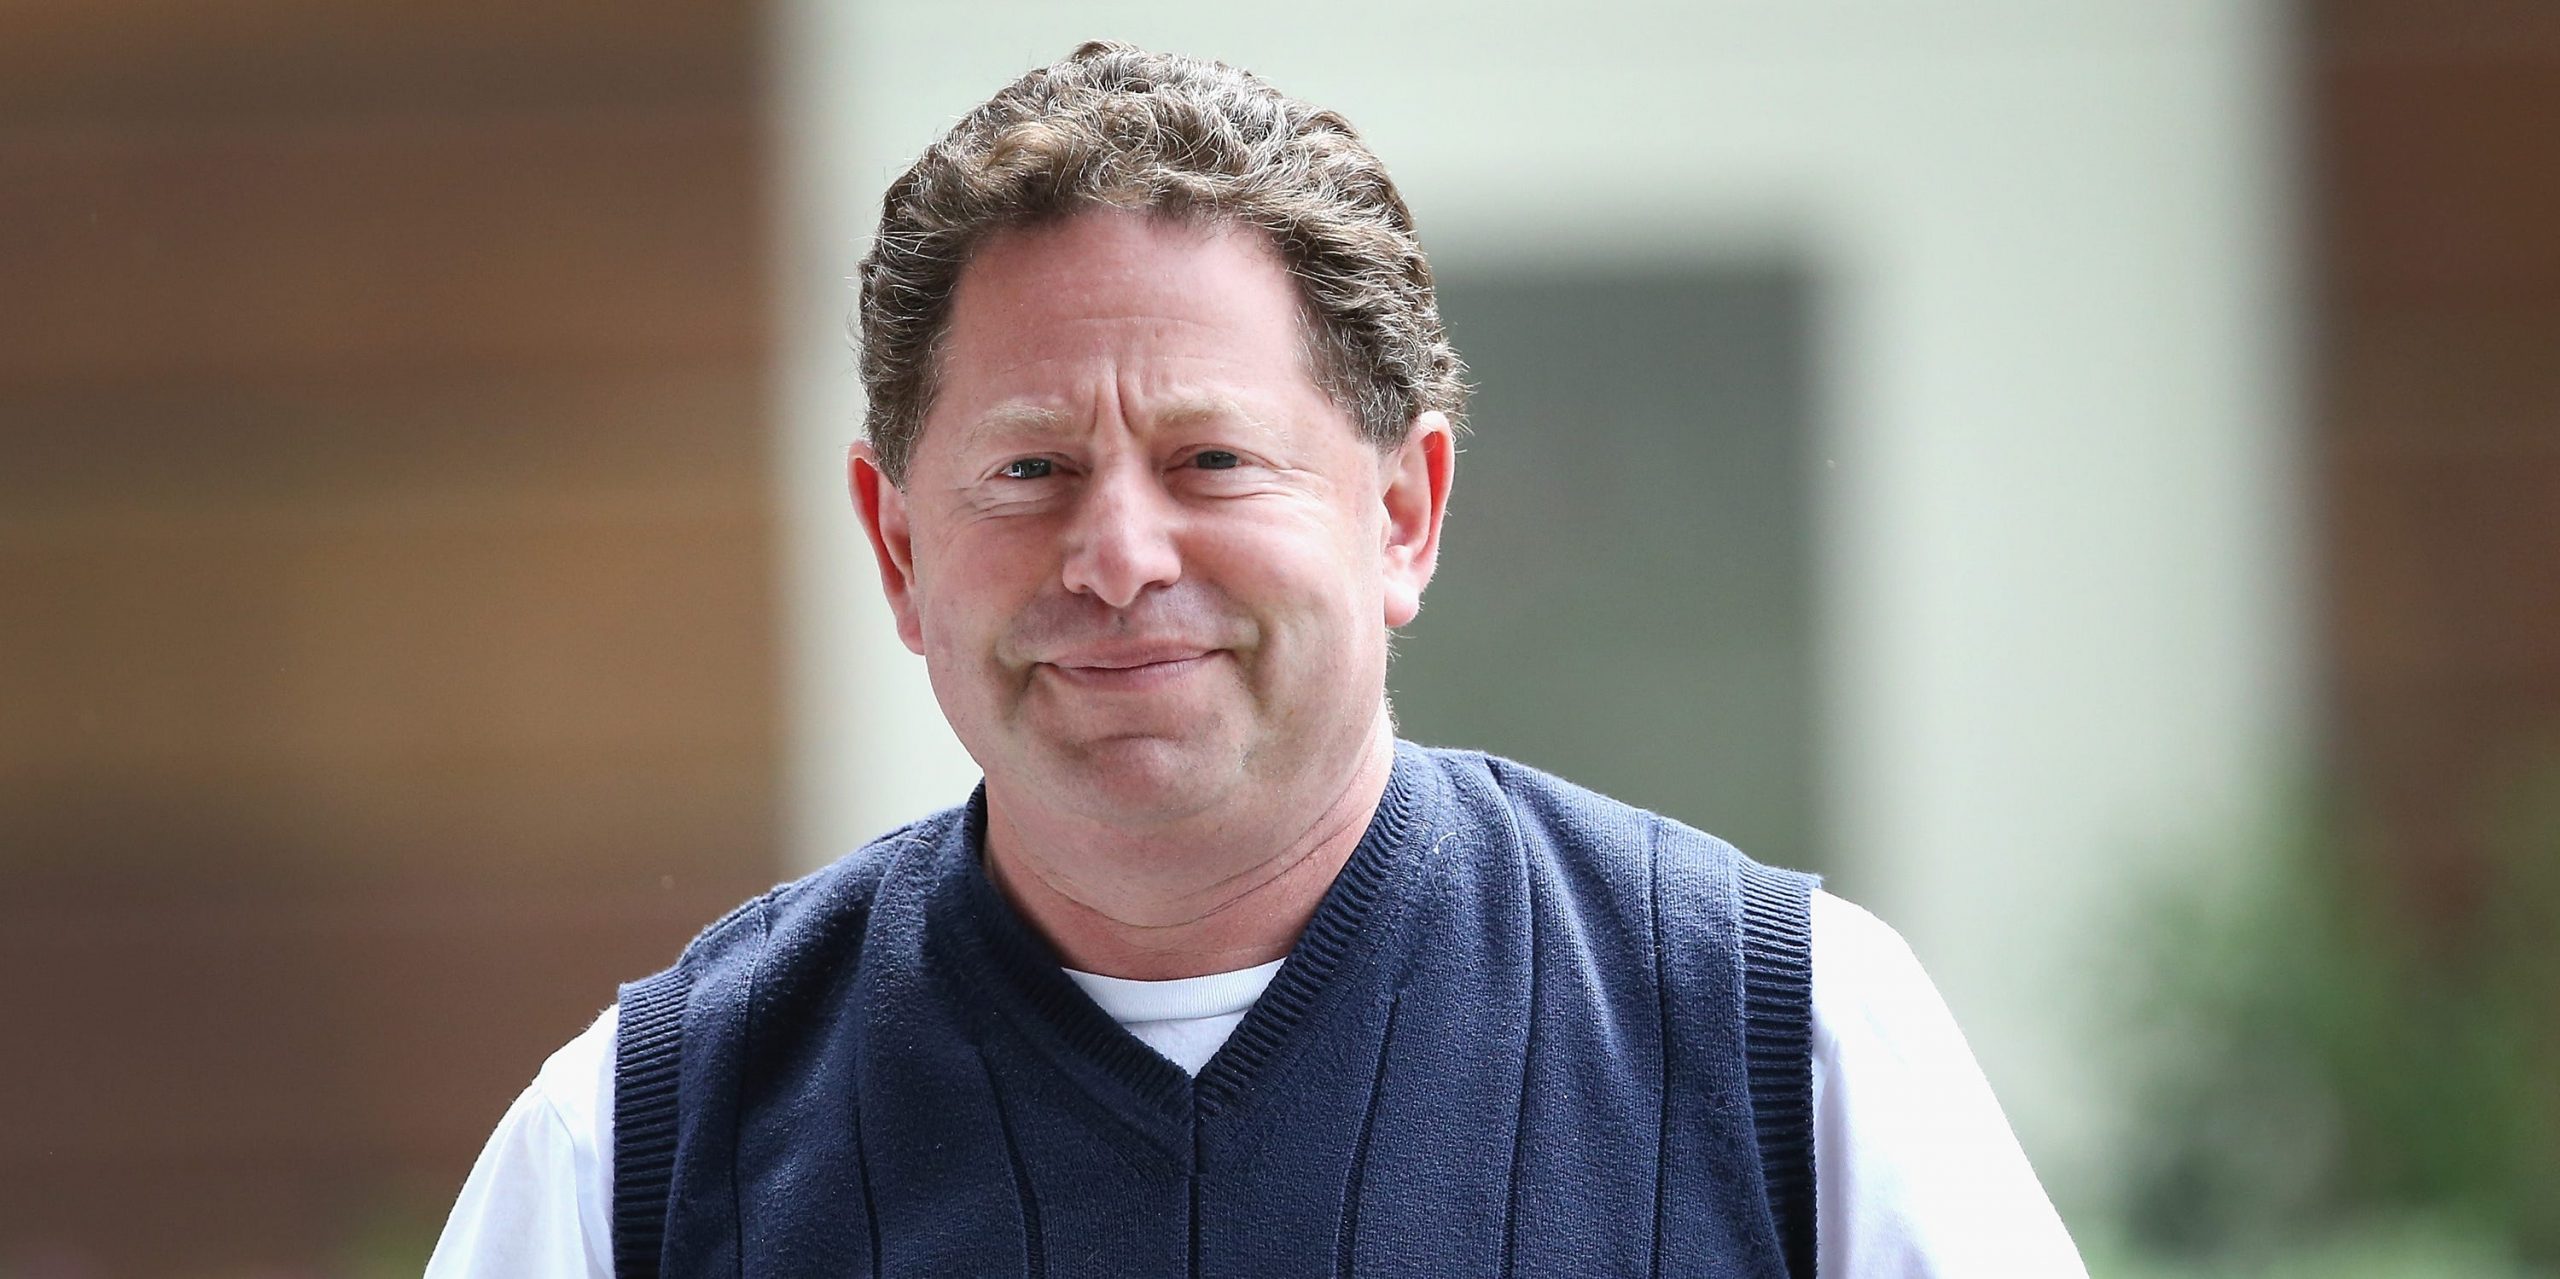 Bobby Kotick, chief executive officer of Activision Blizzard Inc., attends the Allen & Company Sun Valley Conference on July 7, 2015 in Sun Valley, Idaho.